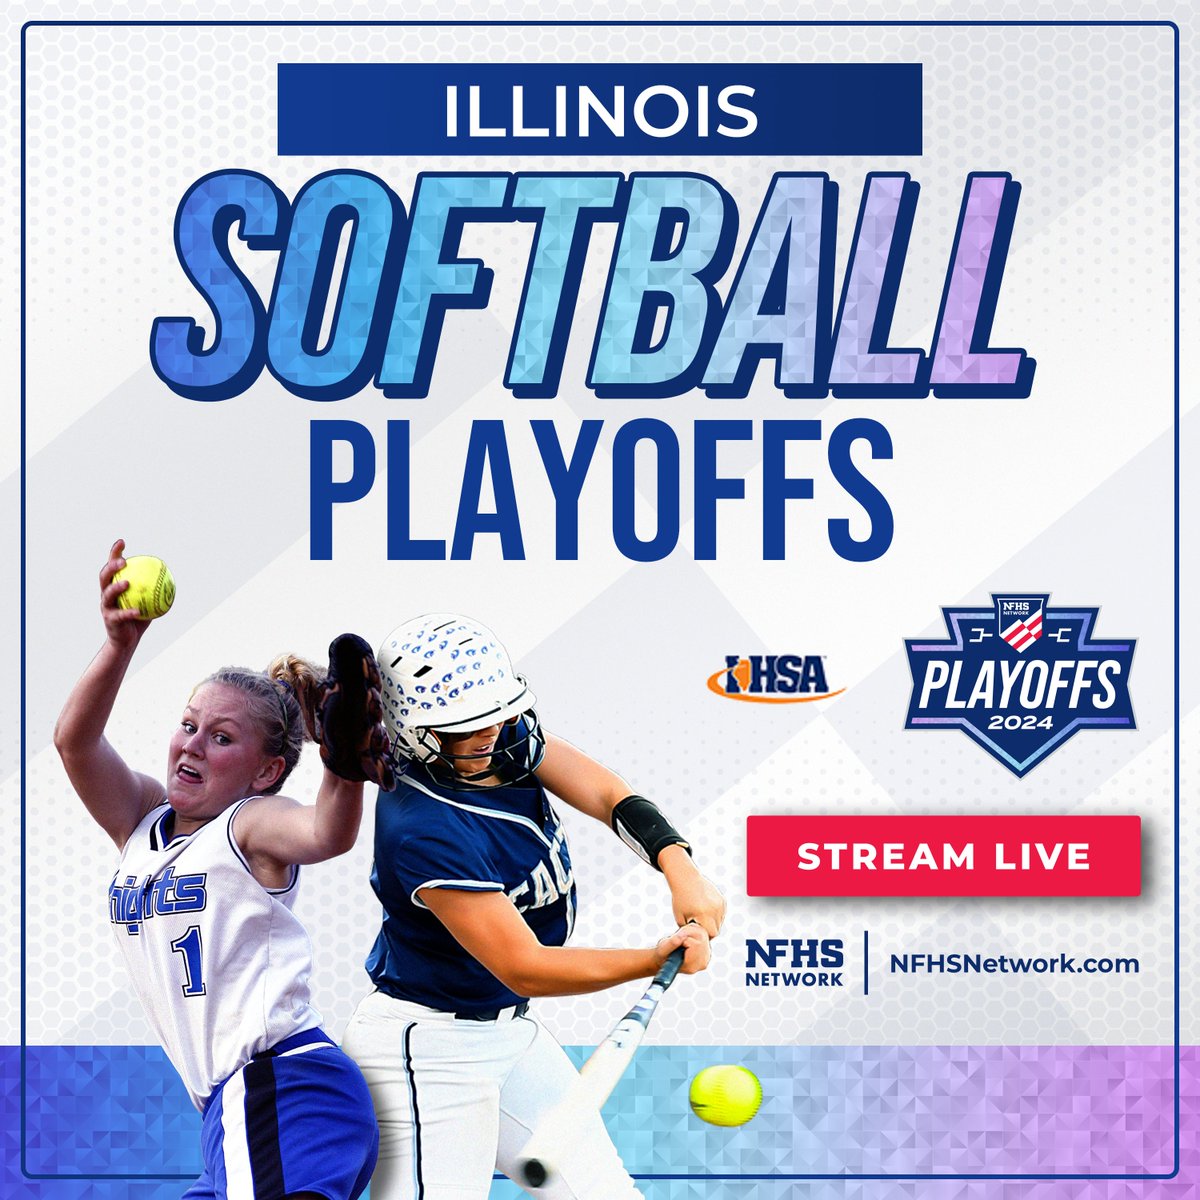 @IHSA_IL The 2024 IHSA Softball Playoffs will continue on the #NFHSNetwork today! 🥎 Stream the action live through the OFFICIAL link here: bit.ly/3WIVBpl 🏆